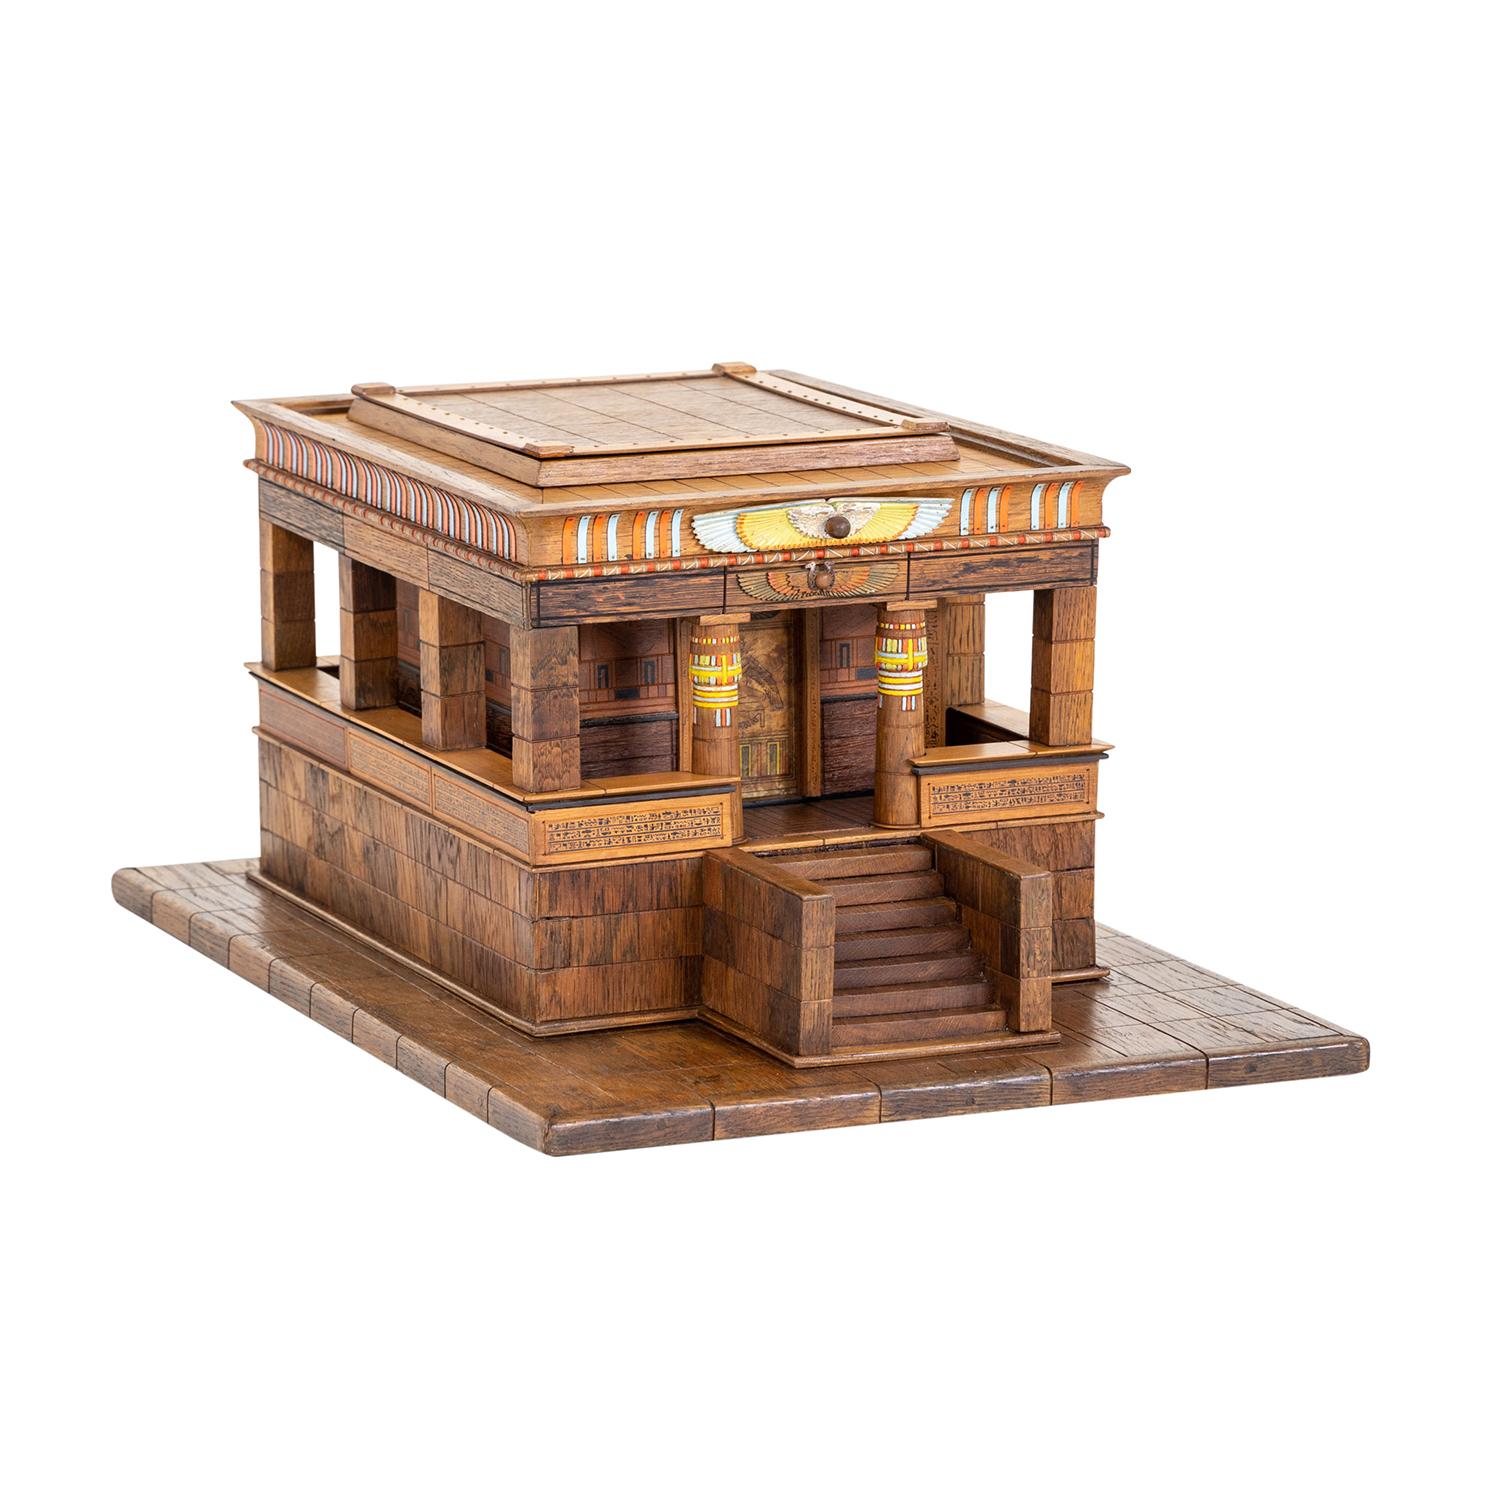 A light-brown, antique German model of an Egyptian temple made of handcrafted, partly painted Mahogany and Walnut, in good condition. The inside of the detailed décor piece is composed with a grave and hidden, secret compartment storage which is